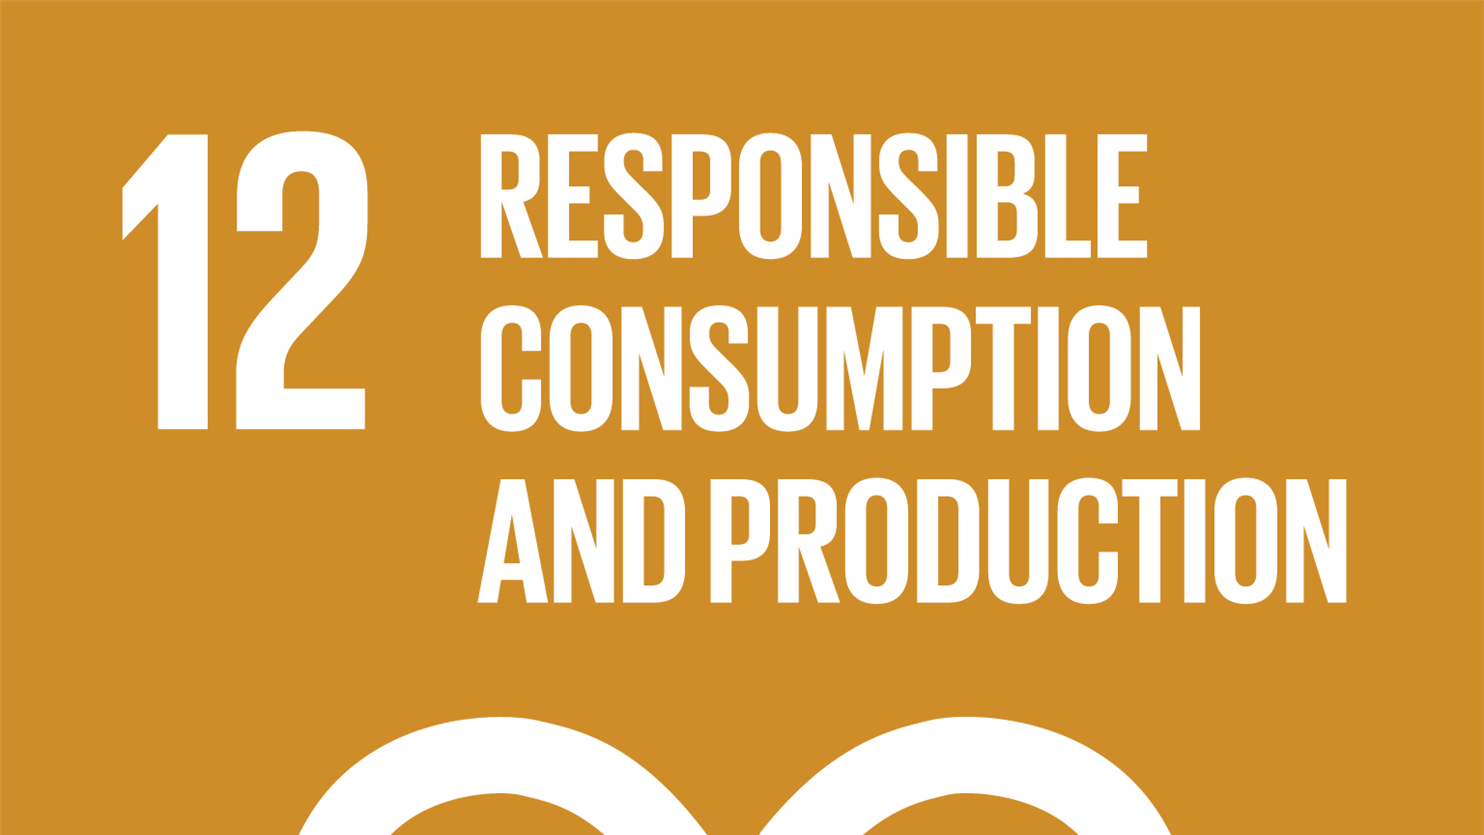 Sustainability goal 12: Responsible Consumption and Production